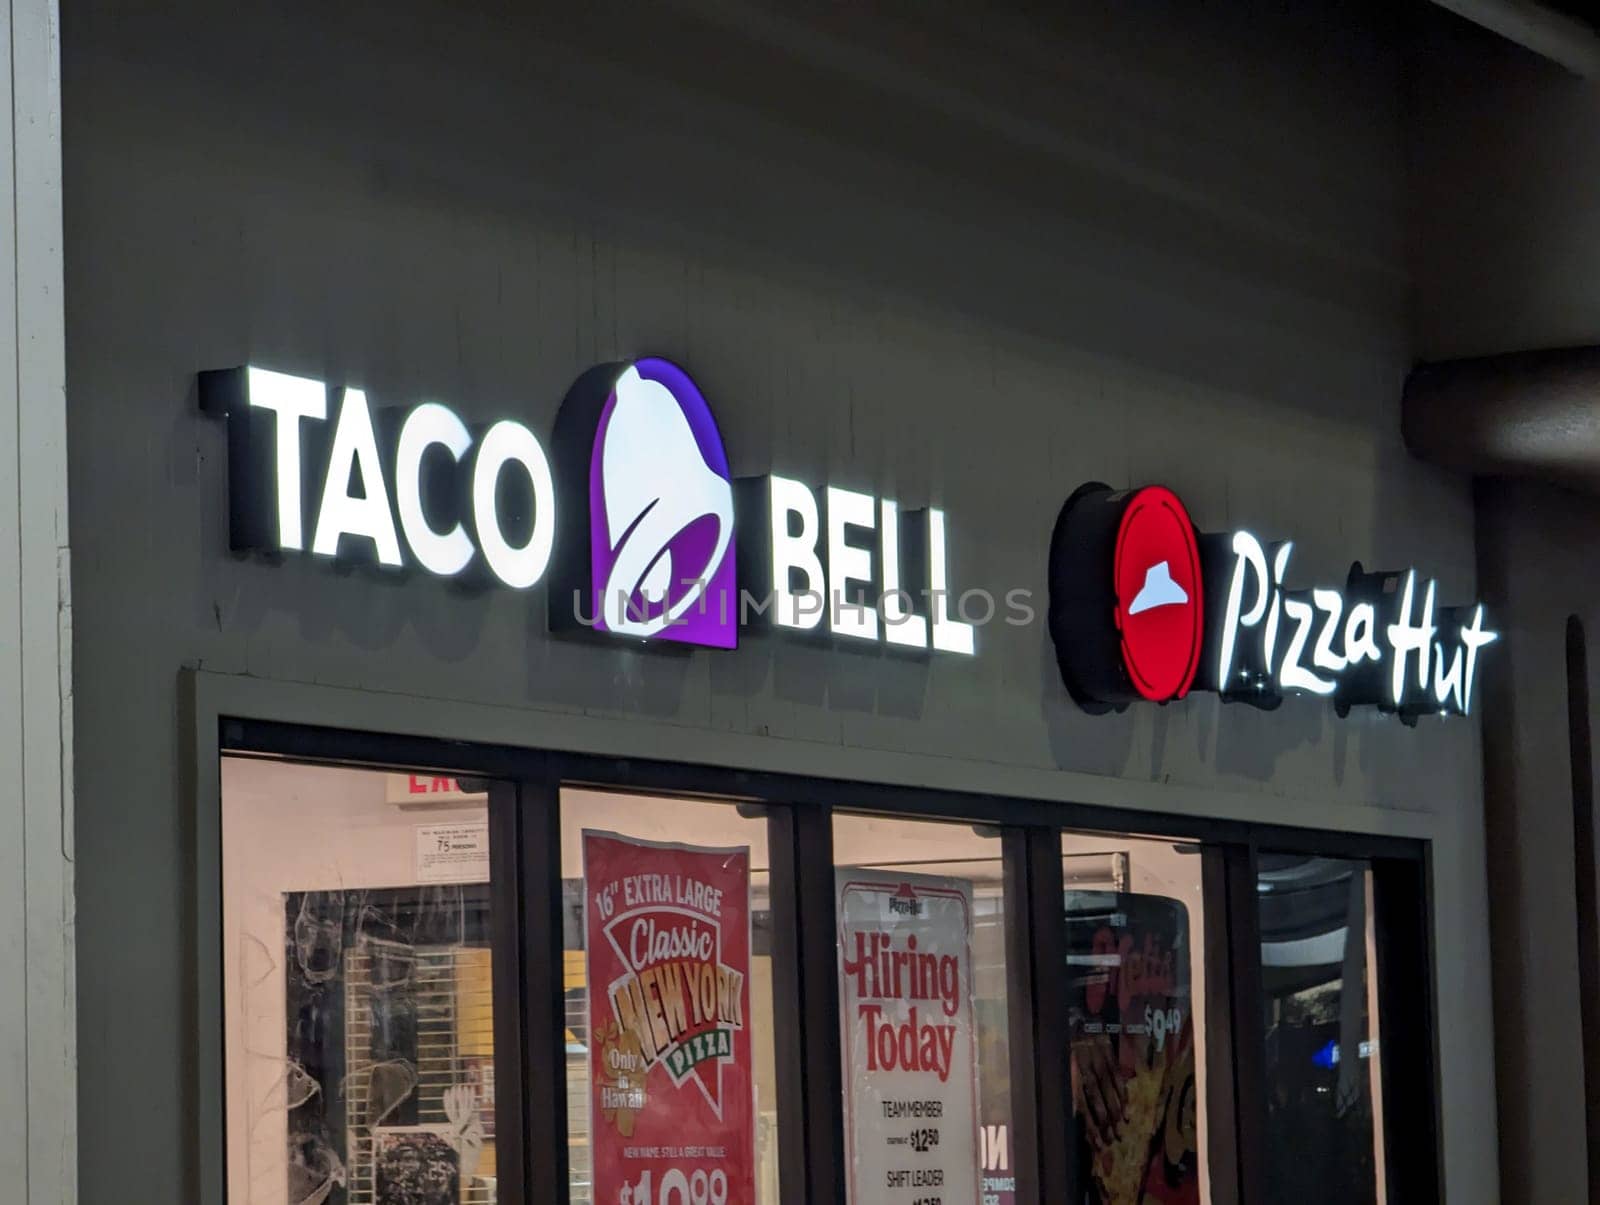 Honolulu - December 6, 2022: Taco Bell and Pizza Hut storefront in a strip mall at night. The storefront has a black awning with white lettering and logos. The windows display advertisements and a hiring sign. The parking lot and other stores are visible in the background.